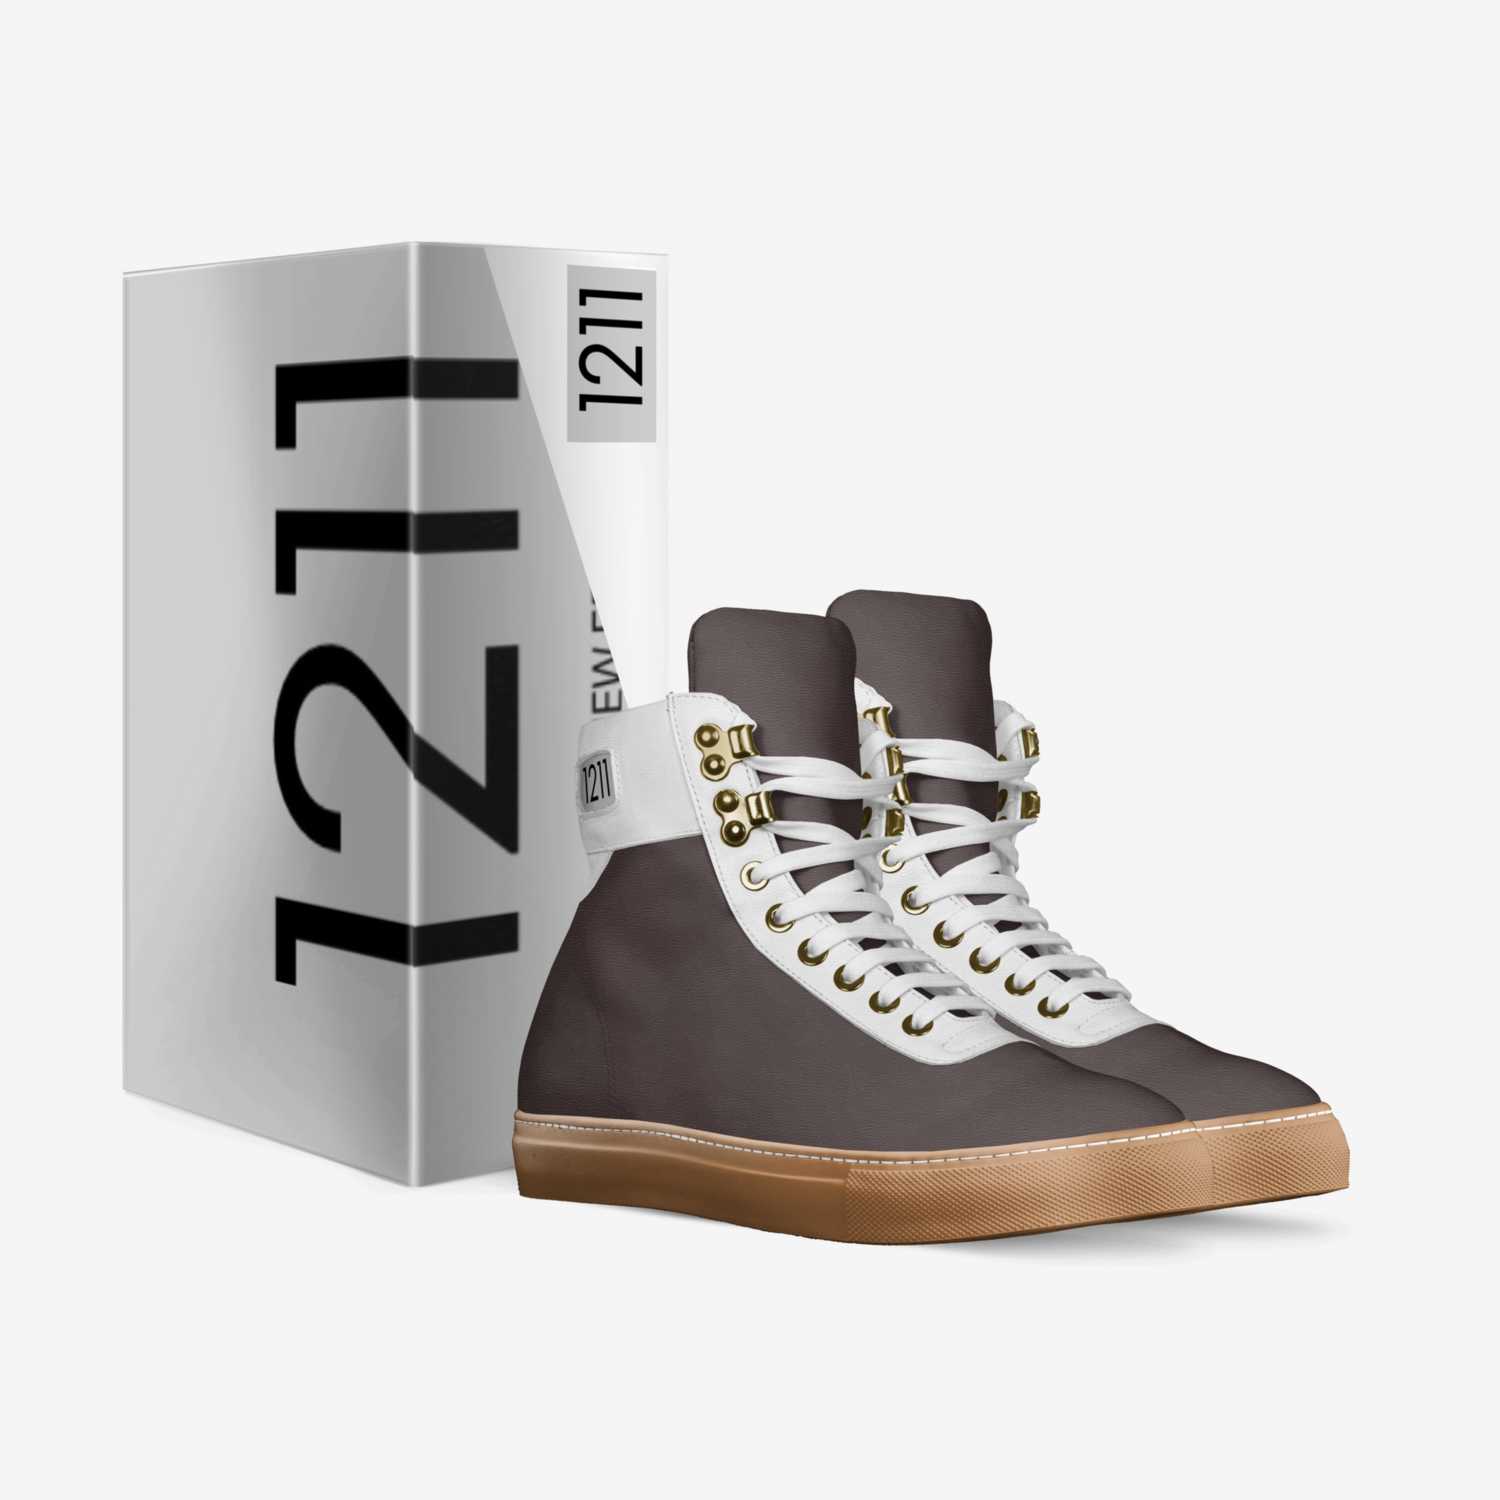 1211 custom made in Italy shoes by Latoya Lanell | Box view